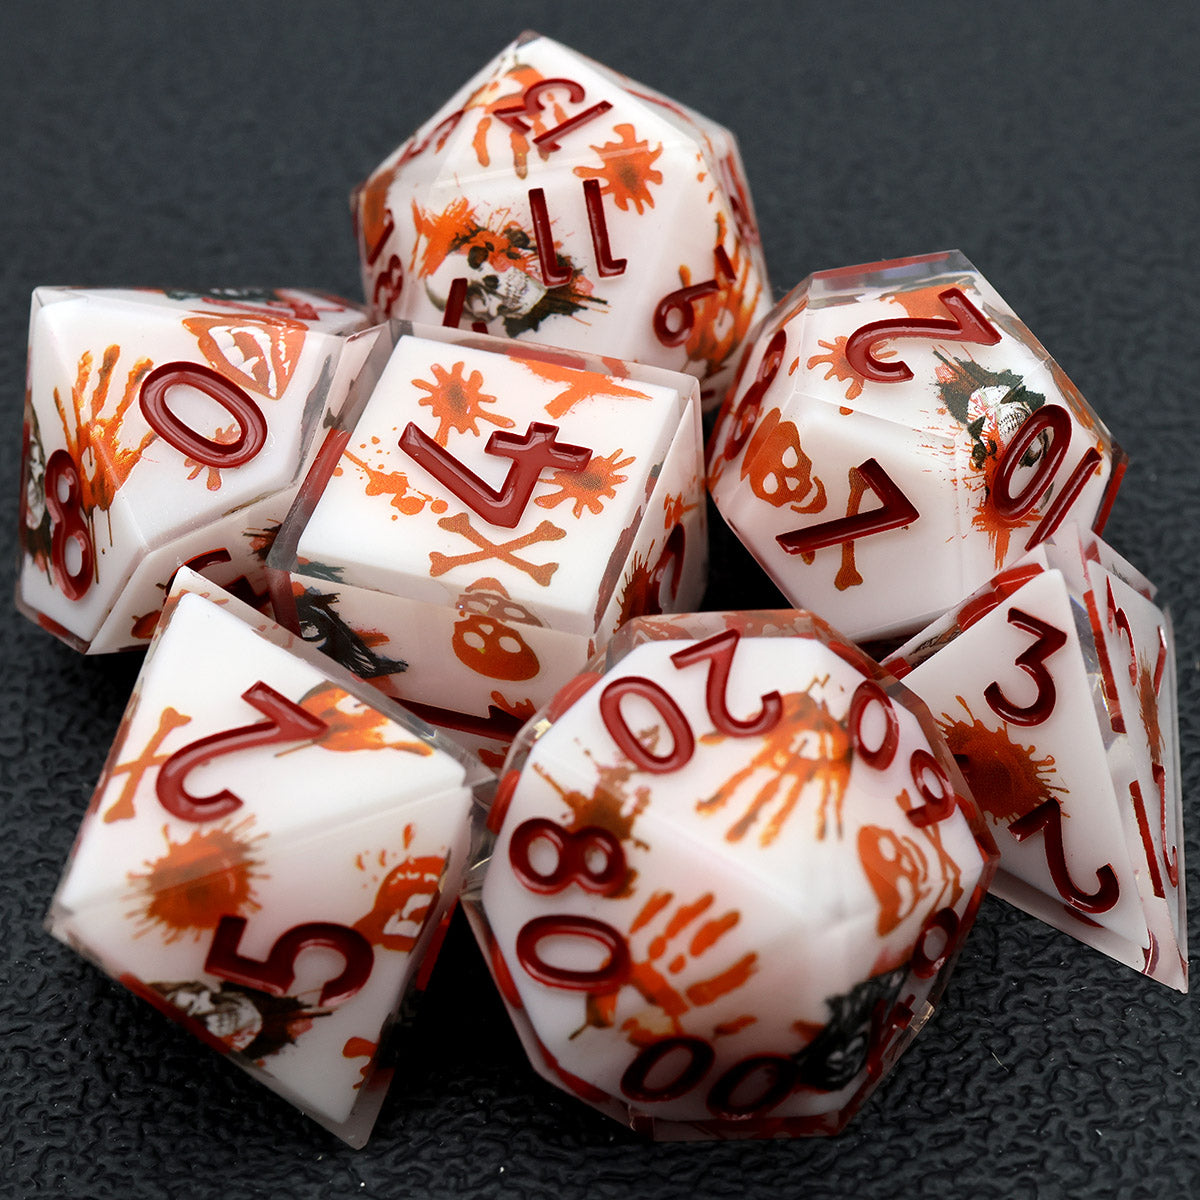 Halloween dnd TTRPG dice sets for role playing games, dice goblin collectors from a UK dice store